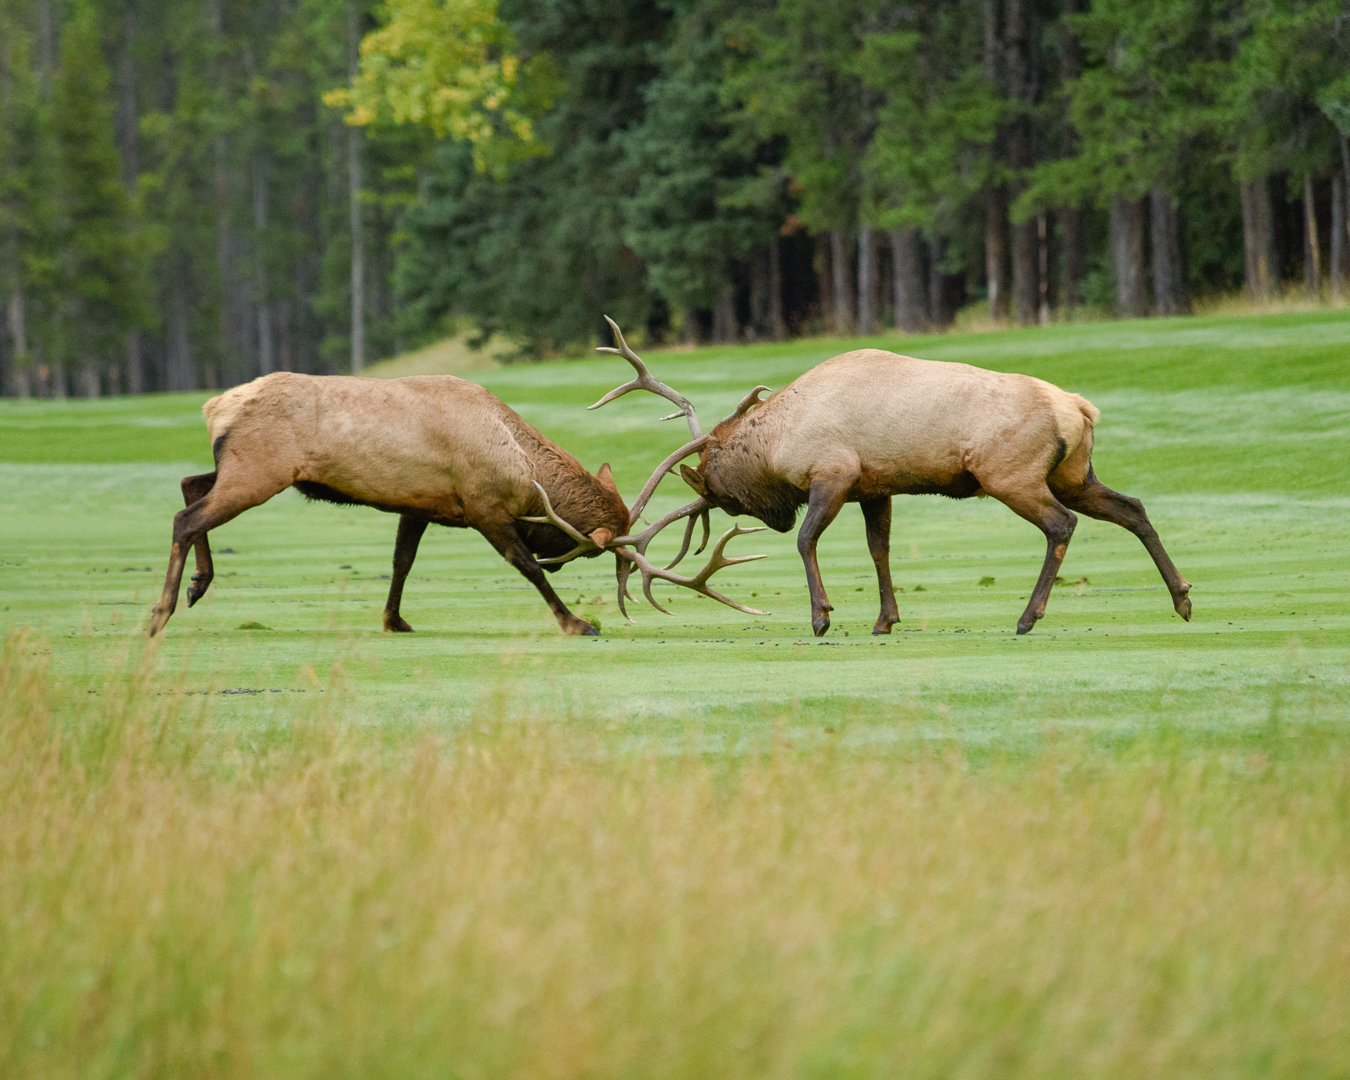 Two elks with horns locked in a fight on a golf course